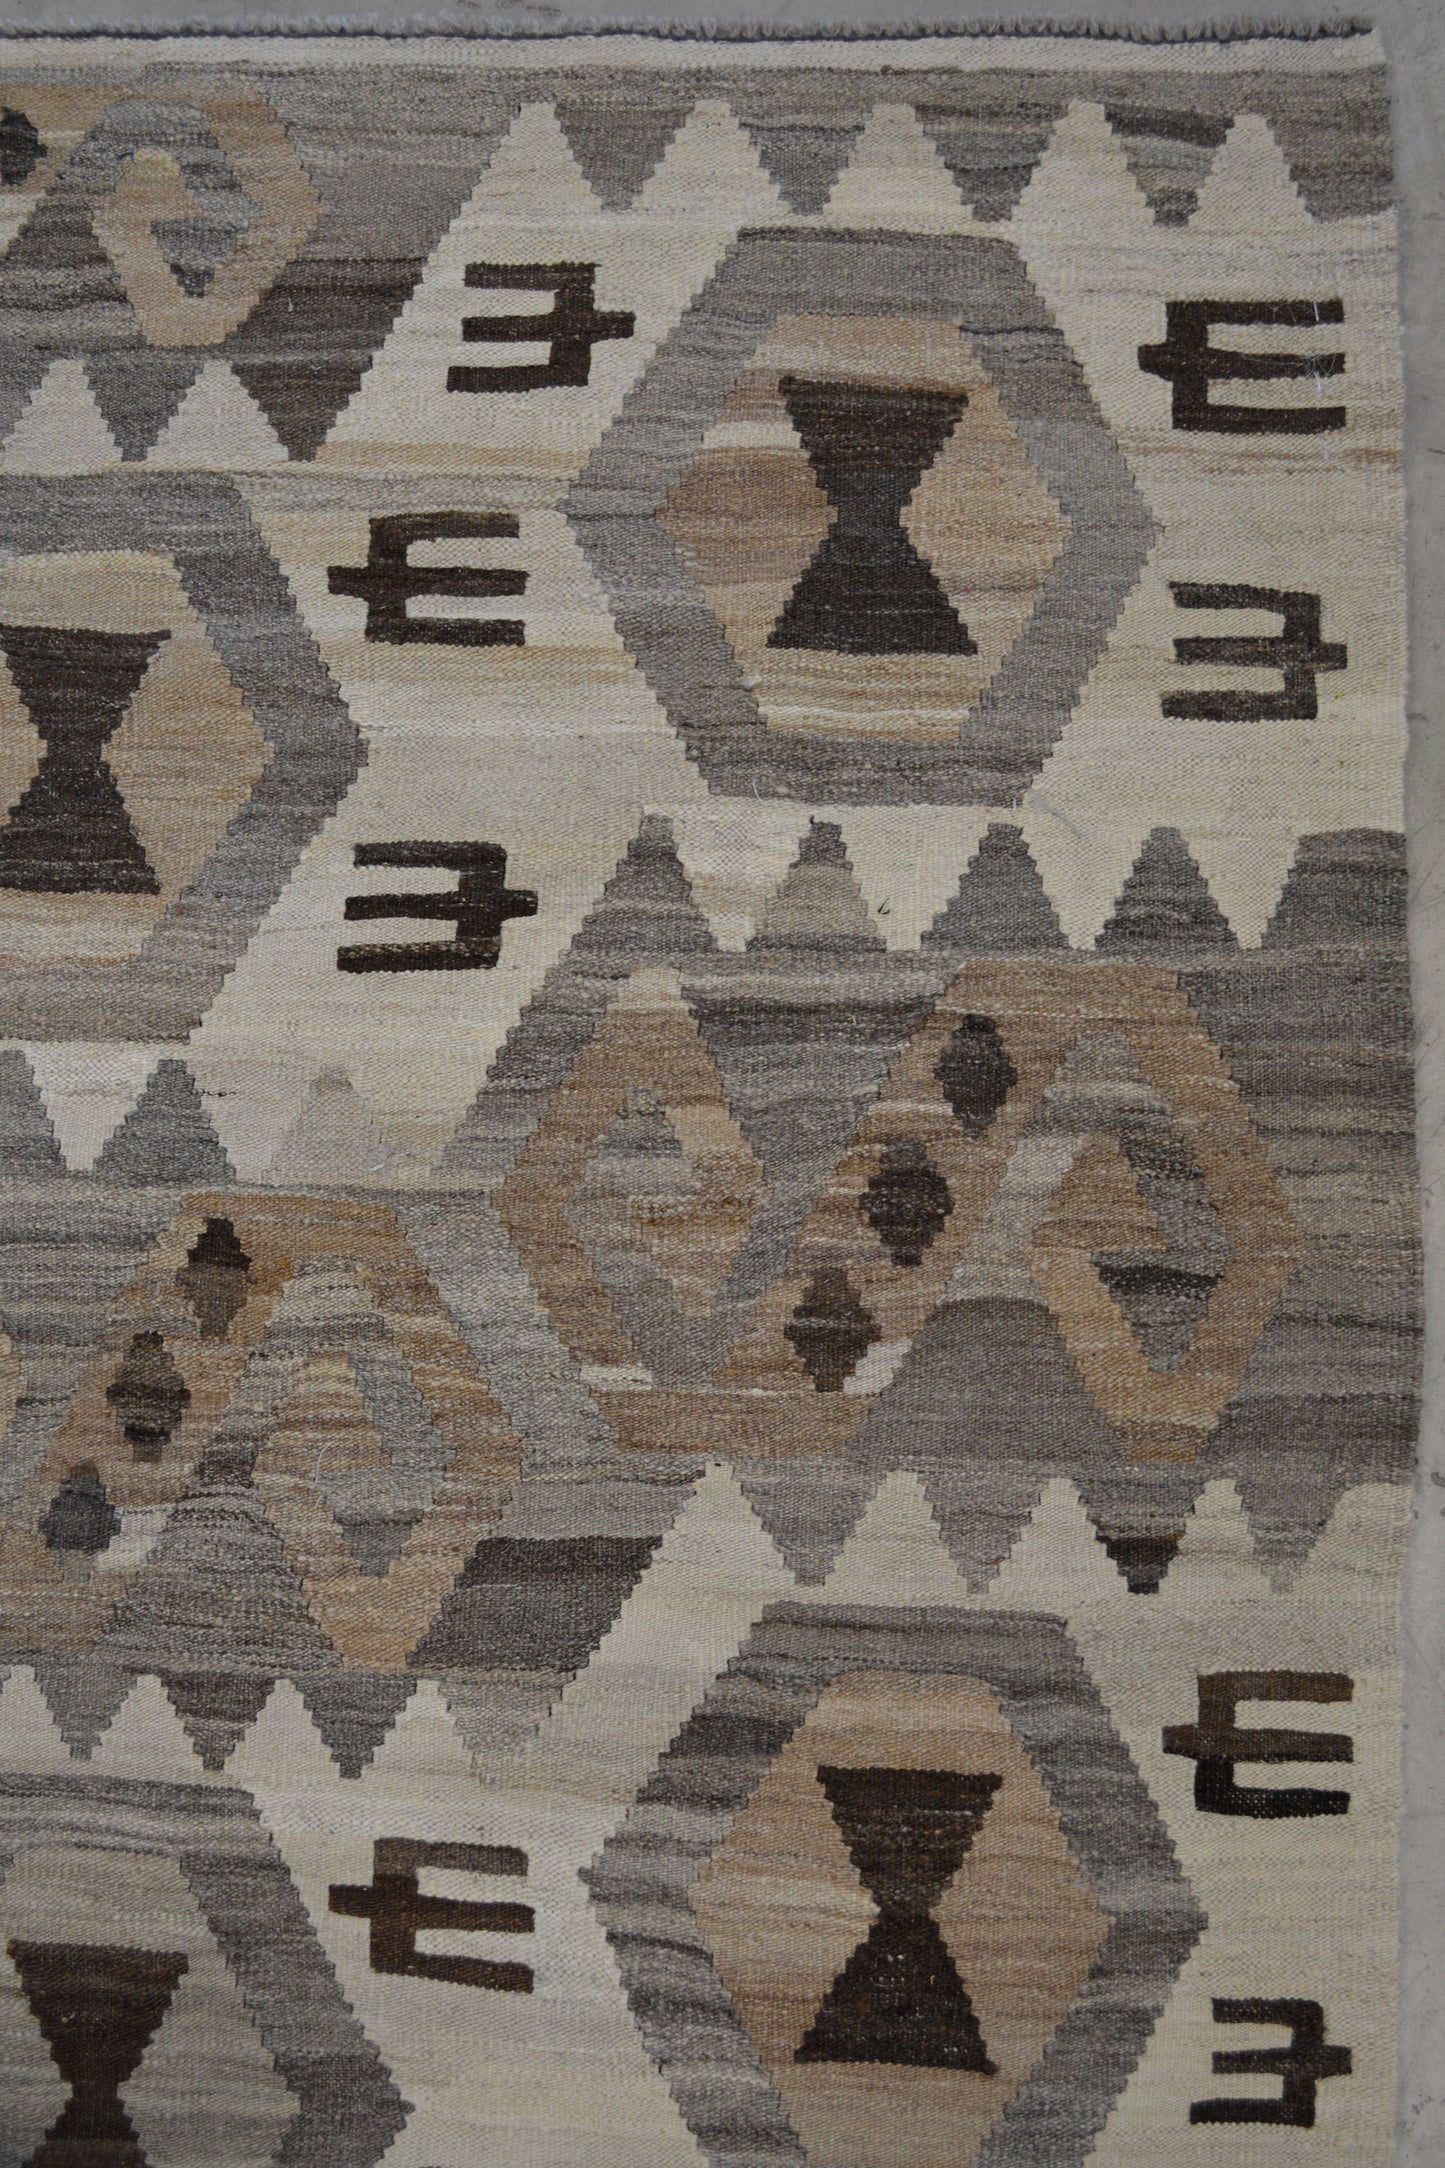  the rug's pattern displays abstract letters "S" that are laid down and they contain three rhombuses each one.